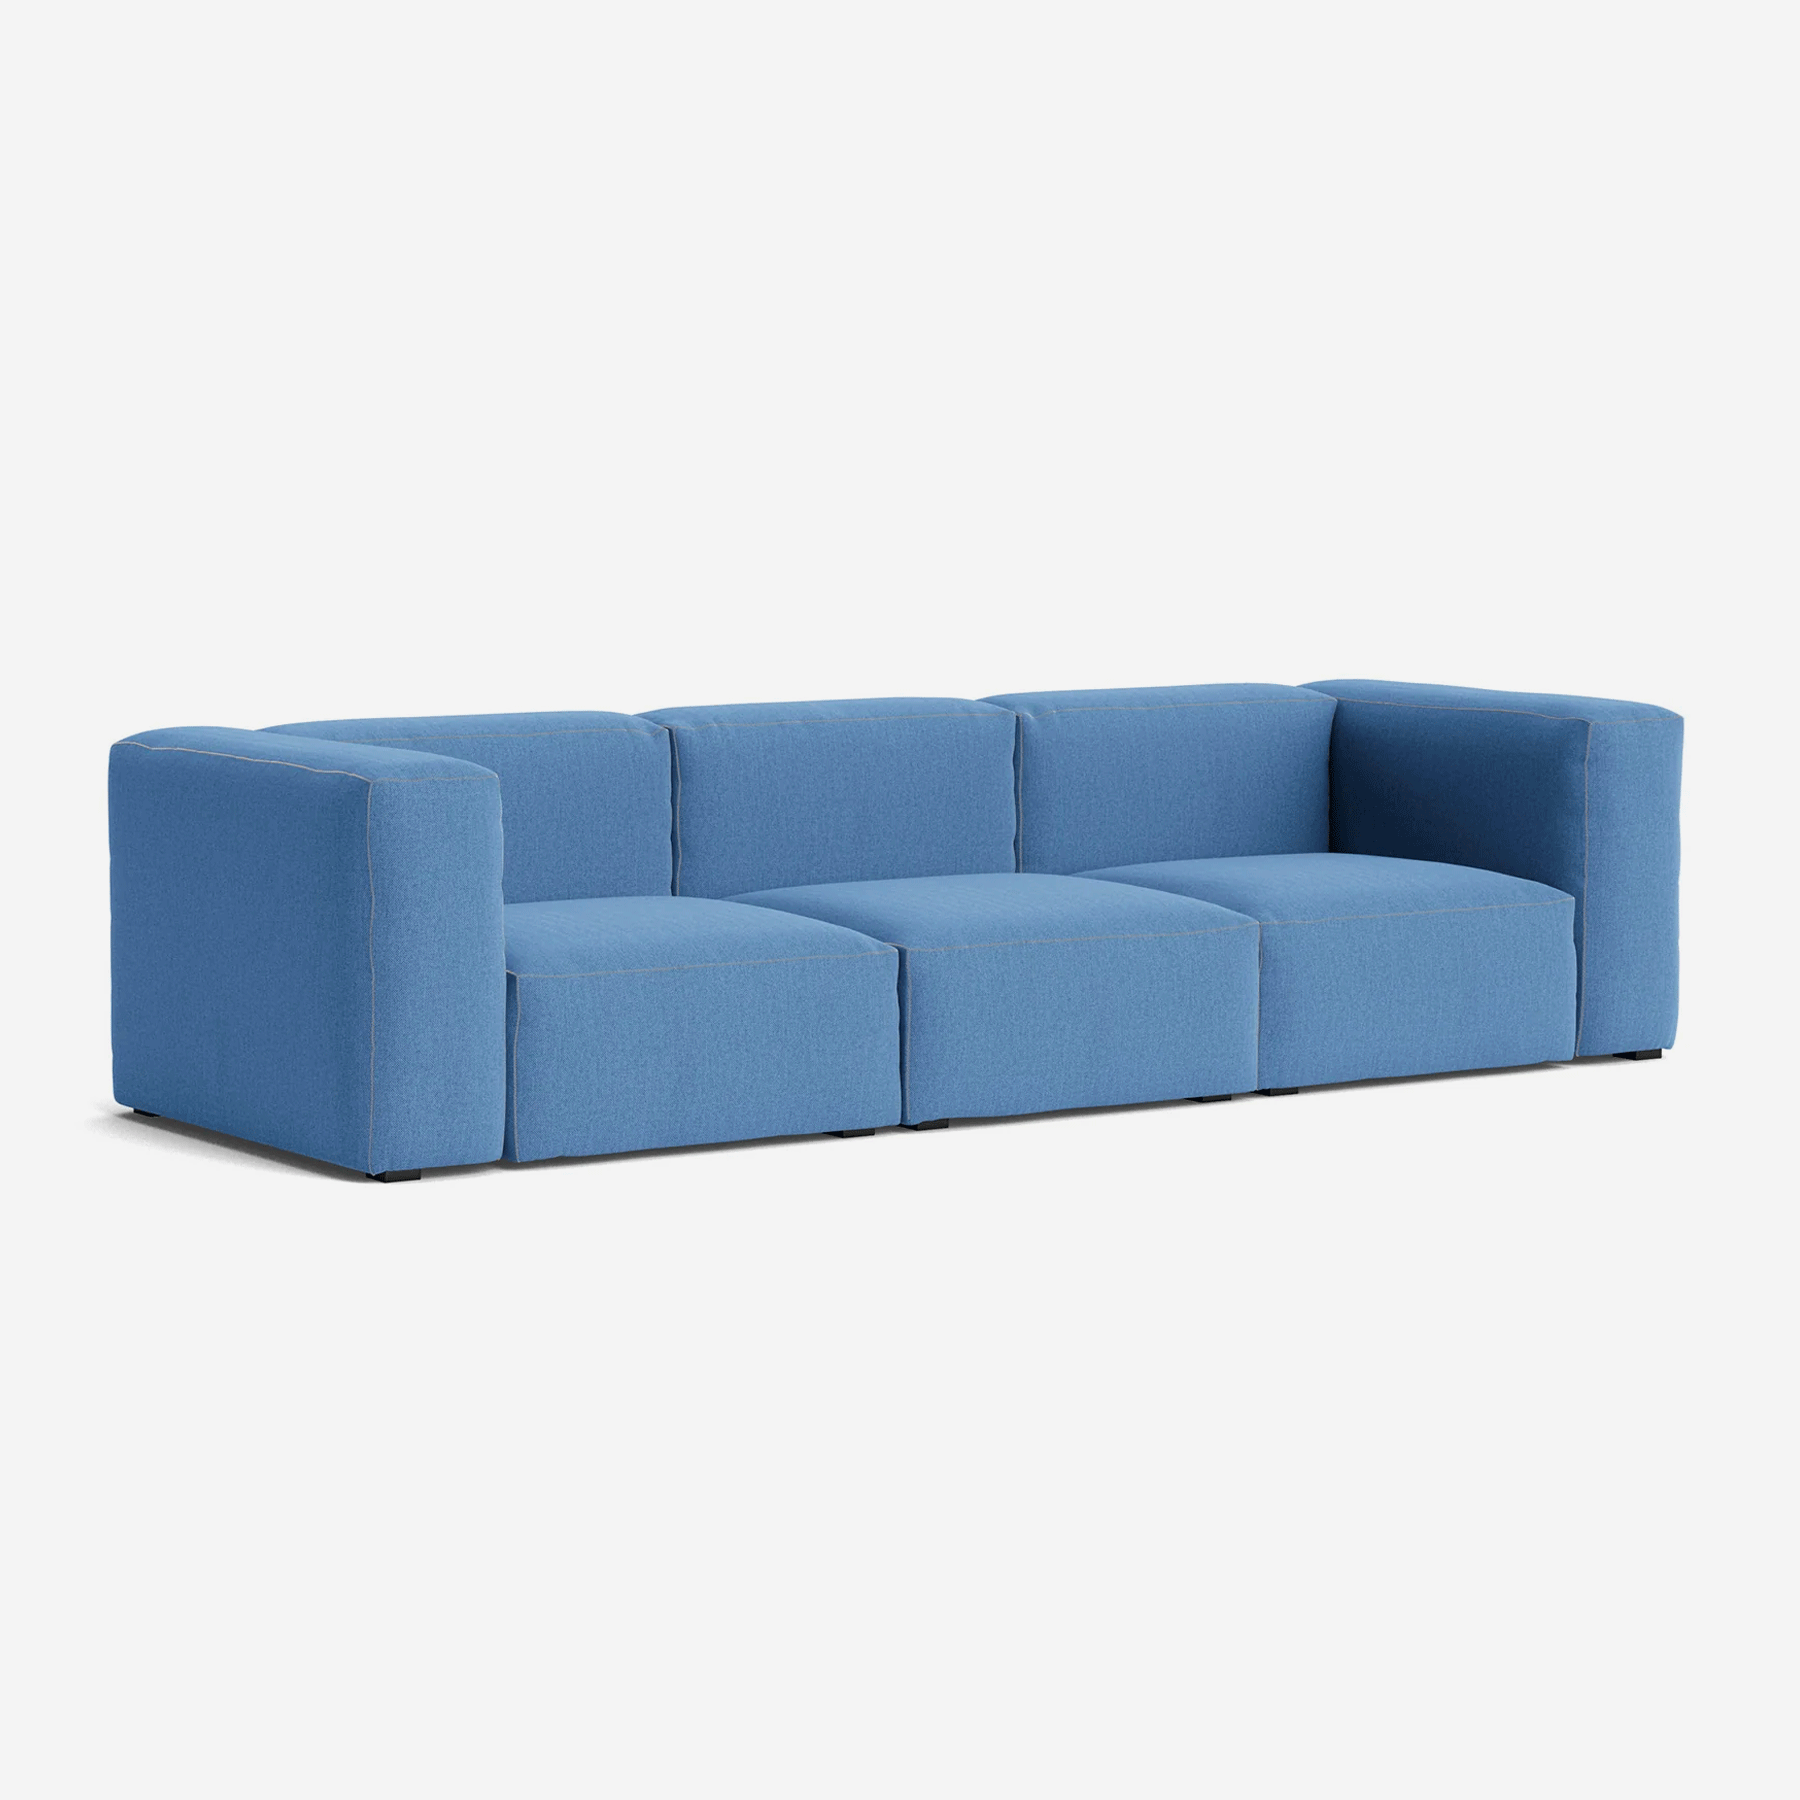 Mags Soft 3 Seater Sofa, Combination 1